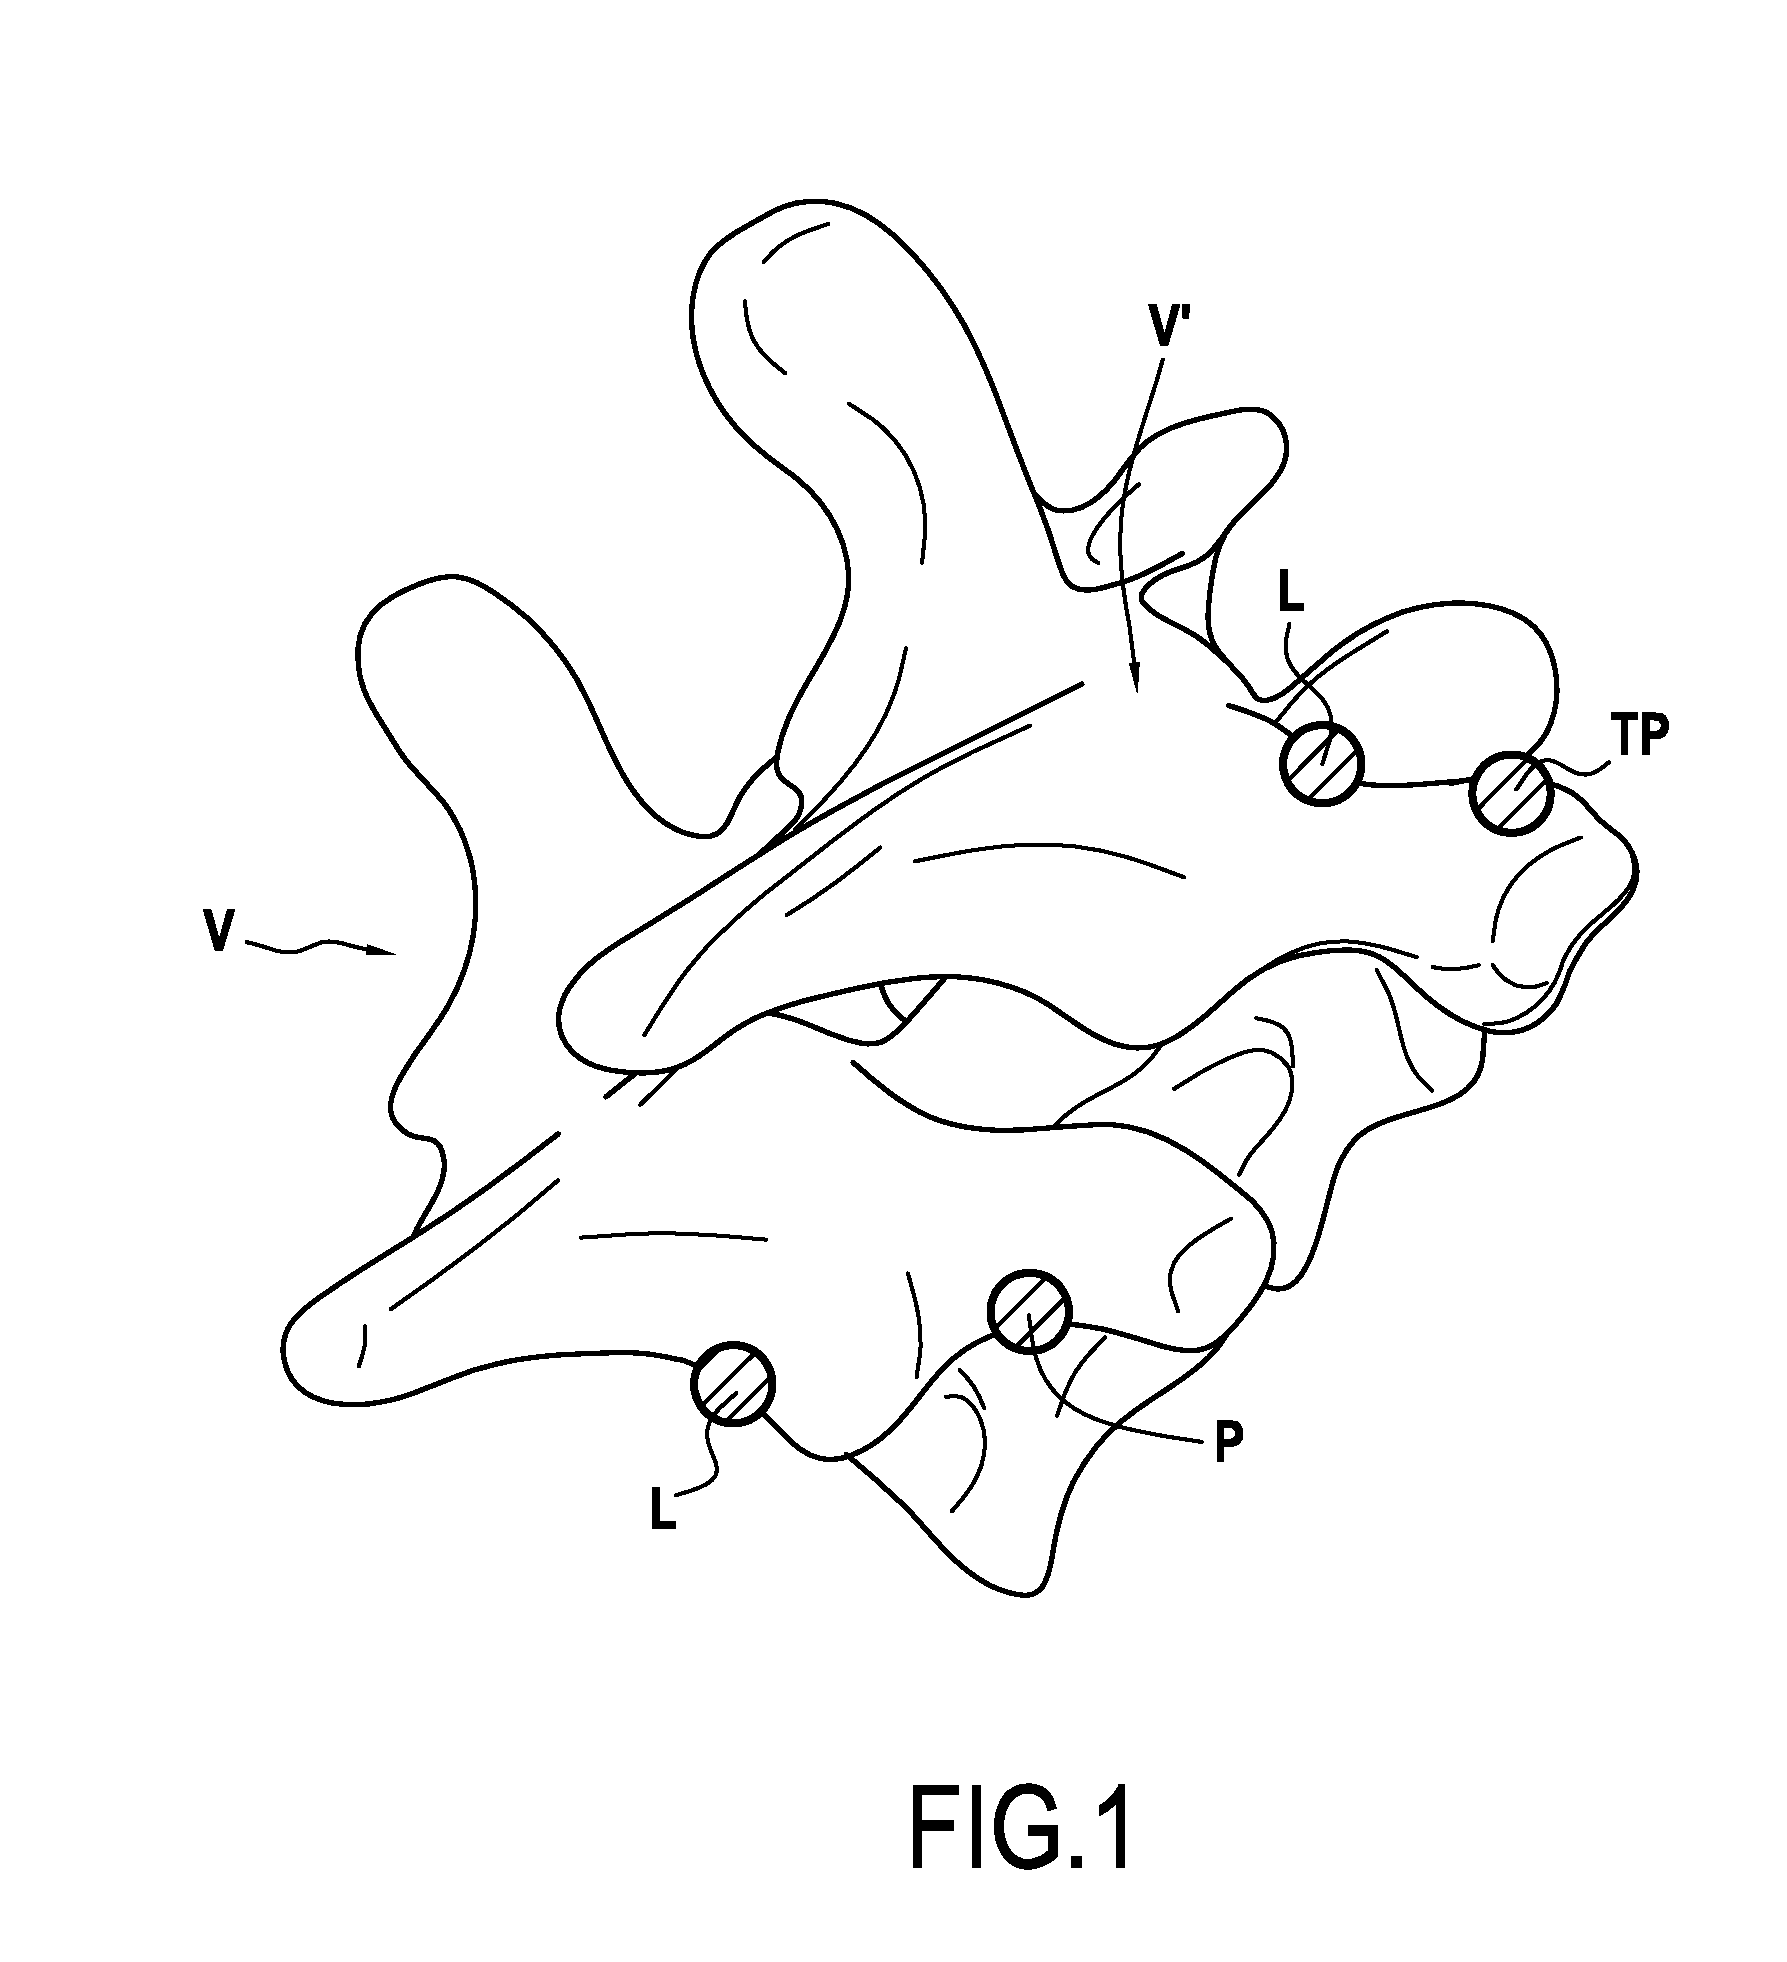 Orthopaedic device and methods for its pre-assembly and assembly